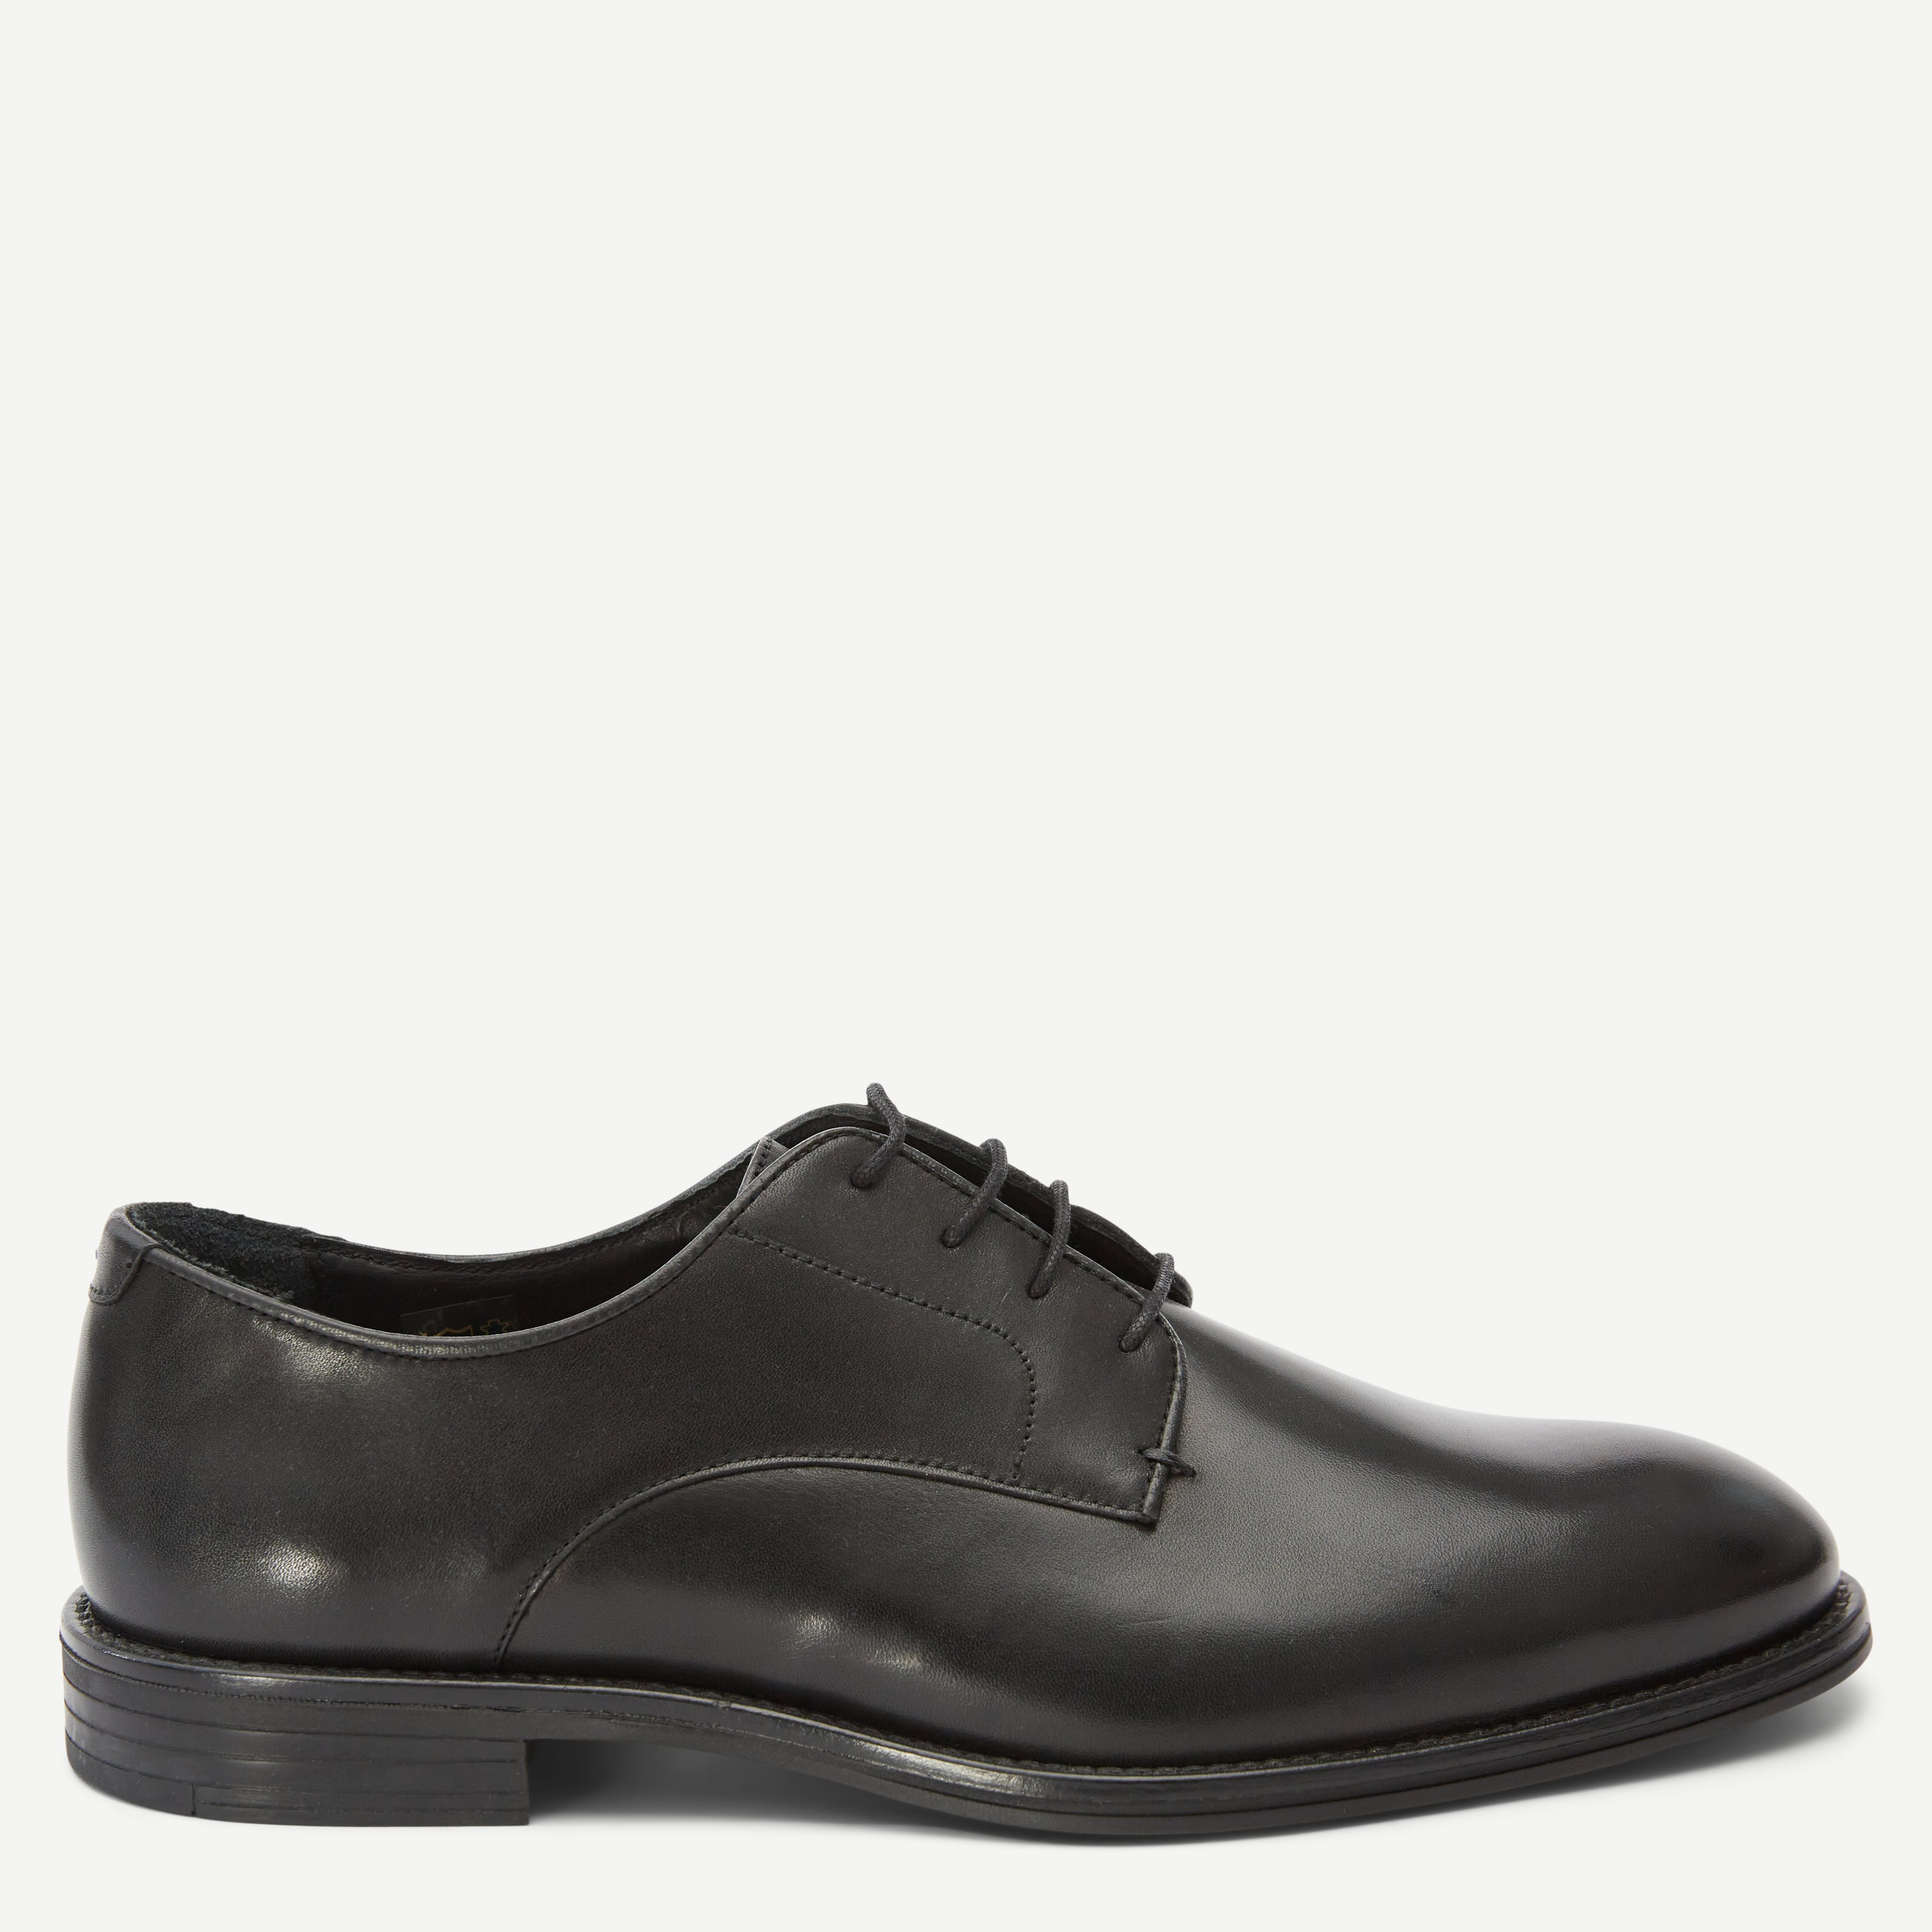 Trained Leather Shoes - Shoes - Black